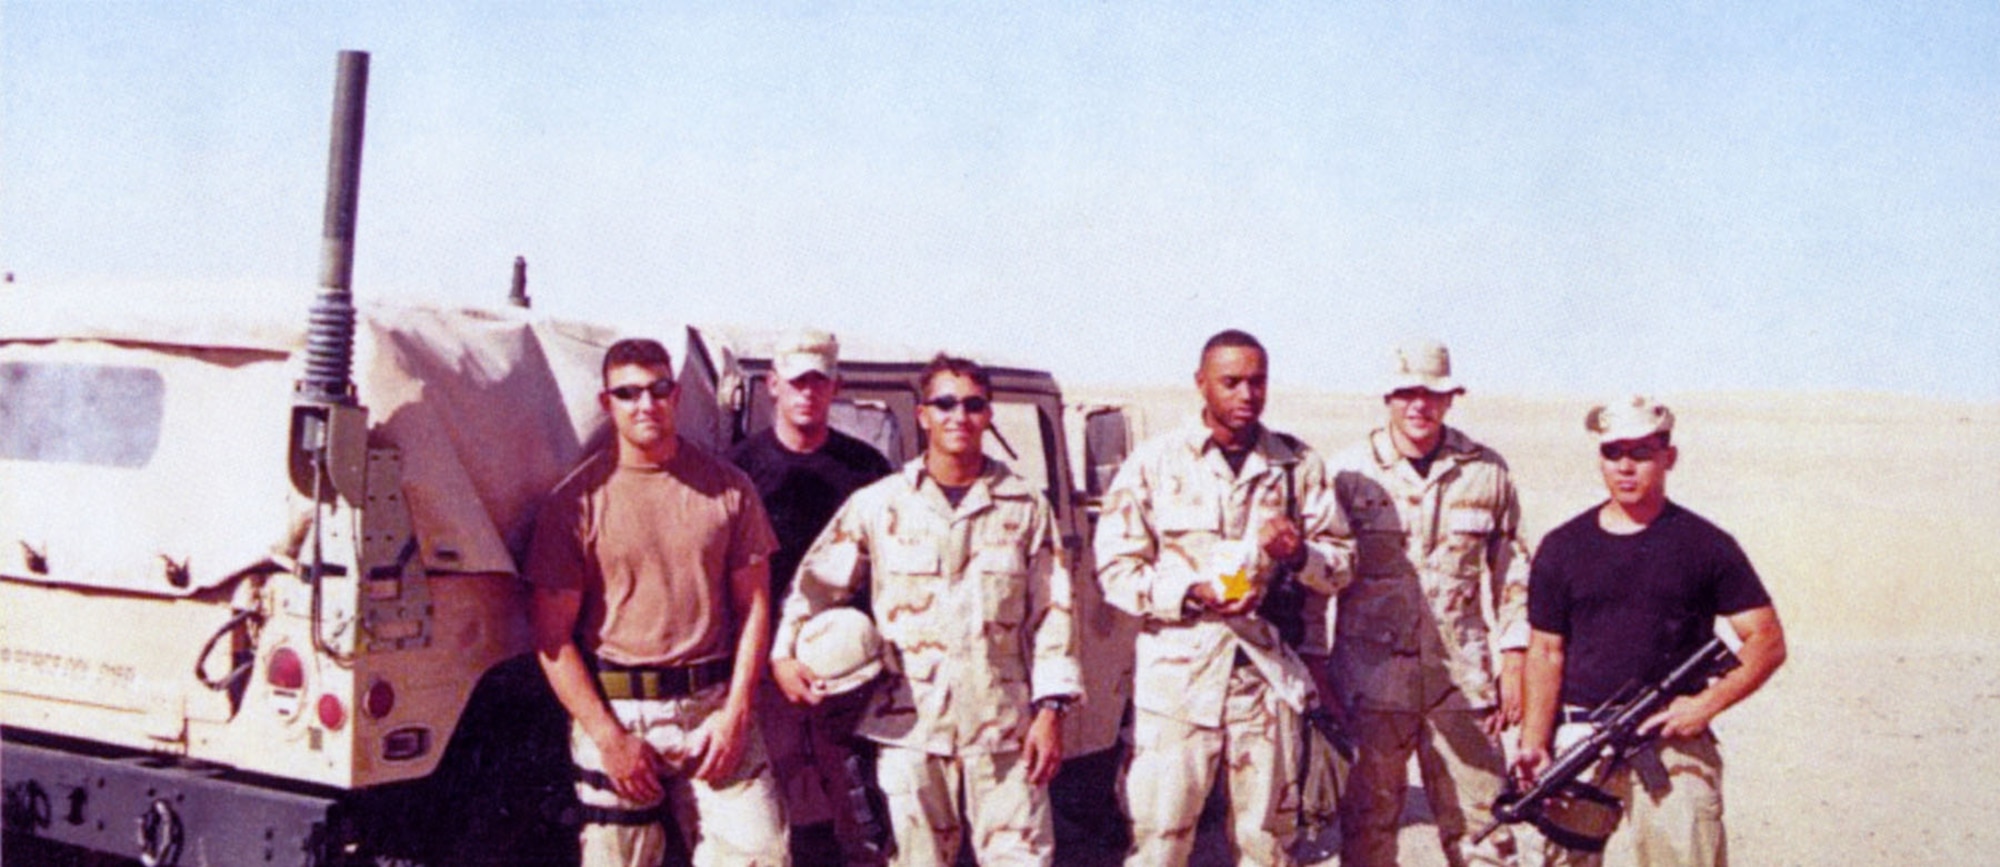 Staff Sgt. Rich Brake (far right) pictured with other TACP personnel of the 332nd Expeditionary Air Support Operations Squadron during Operation Southern Watch in the summer of 2001. (U.S. Air Force photo)